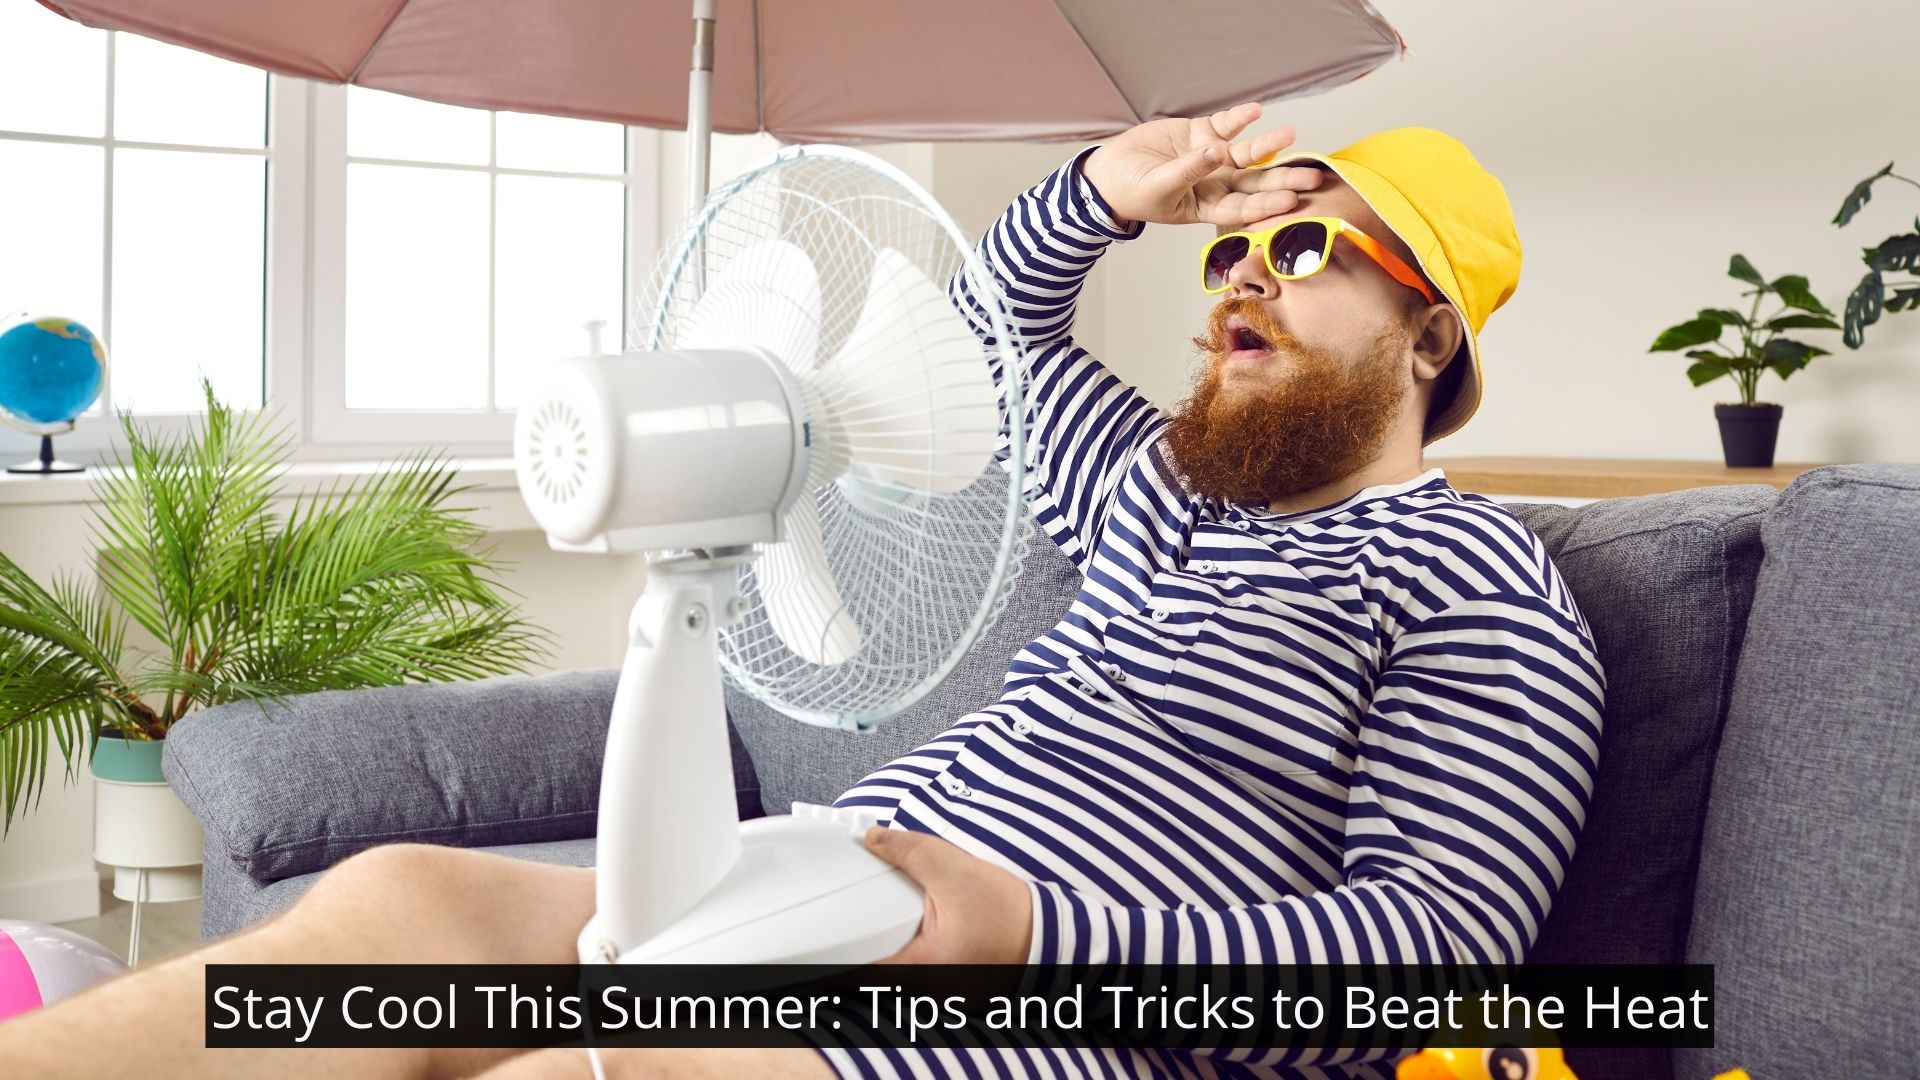 Stay Cool This Summer Tips and Tricks to Beat the Heat